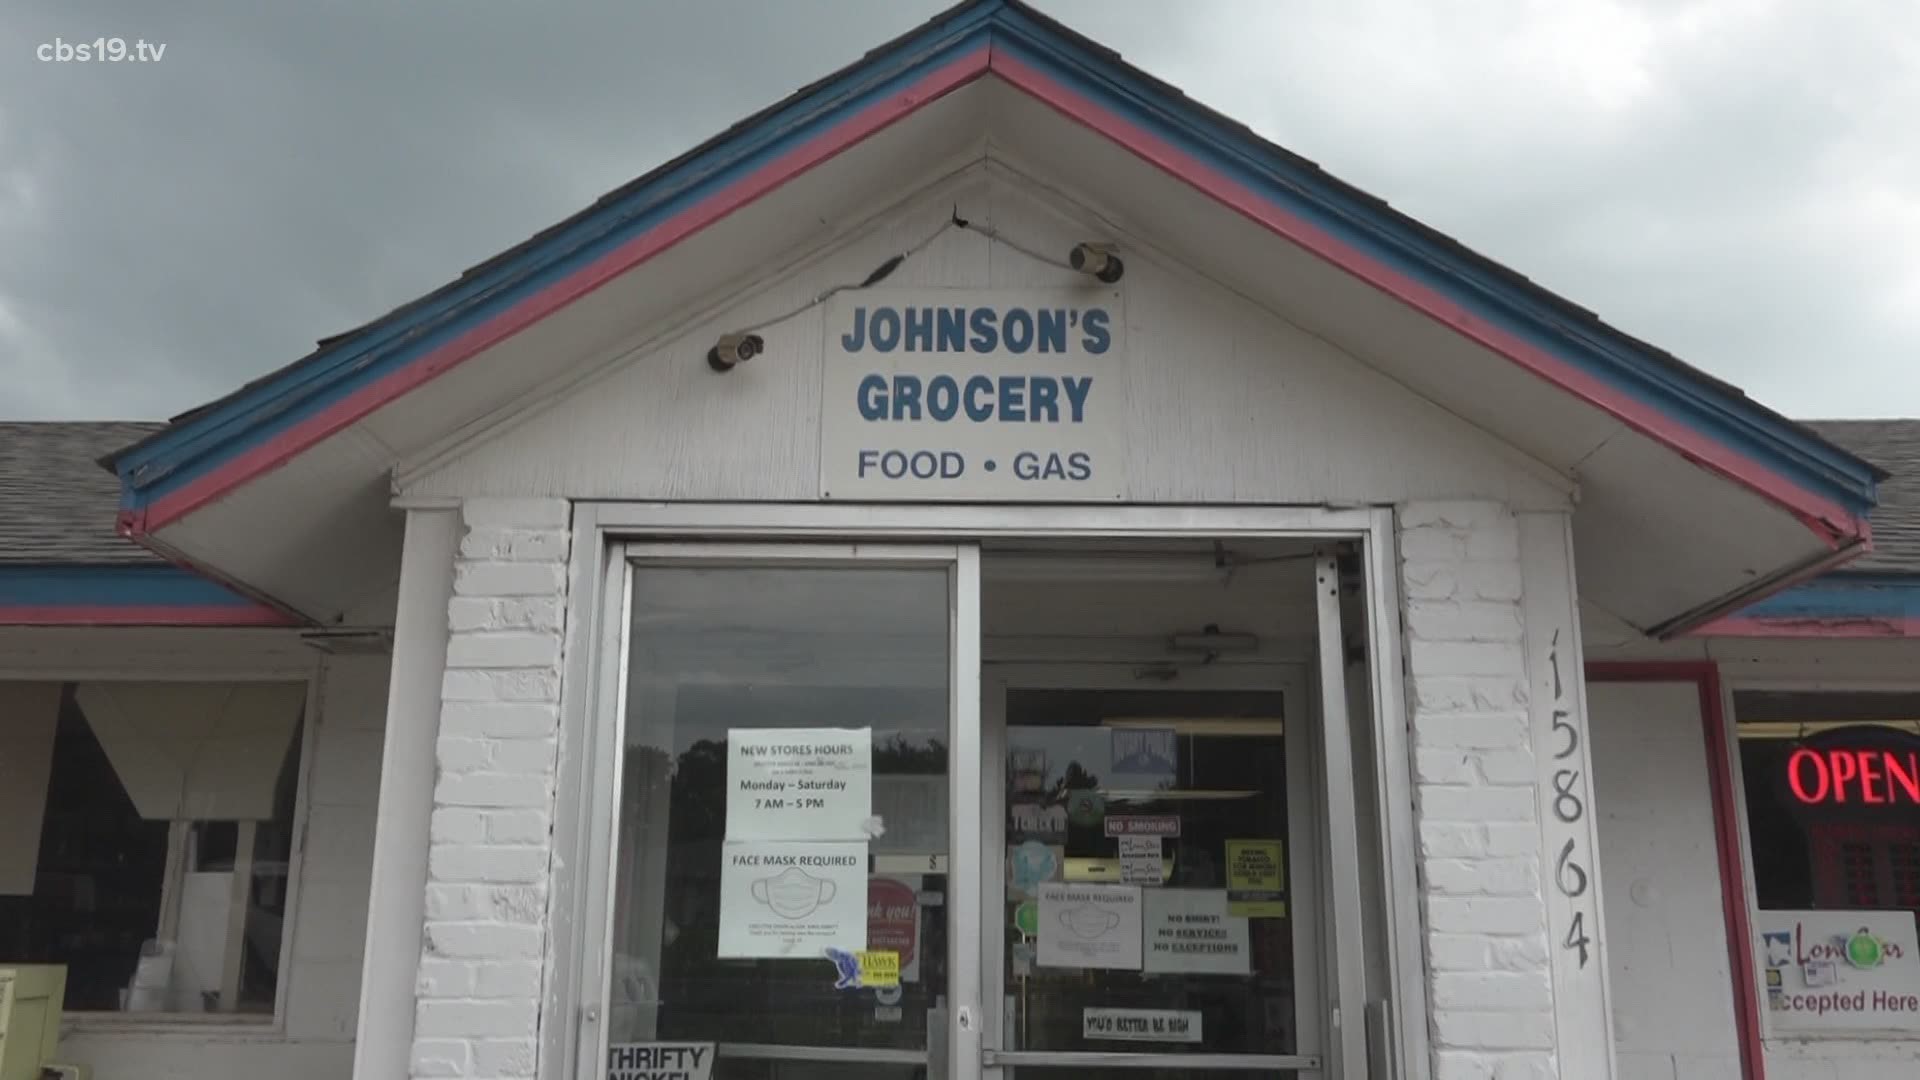 Johnson's Grocery Store is not only a one-stop shop for necessities, but also a staple for the community.